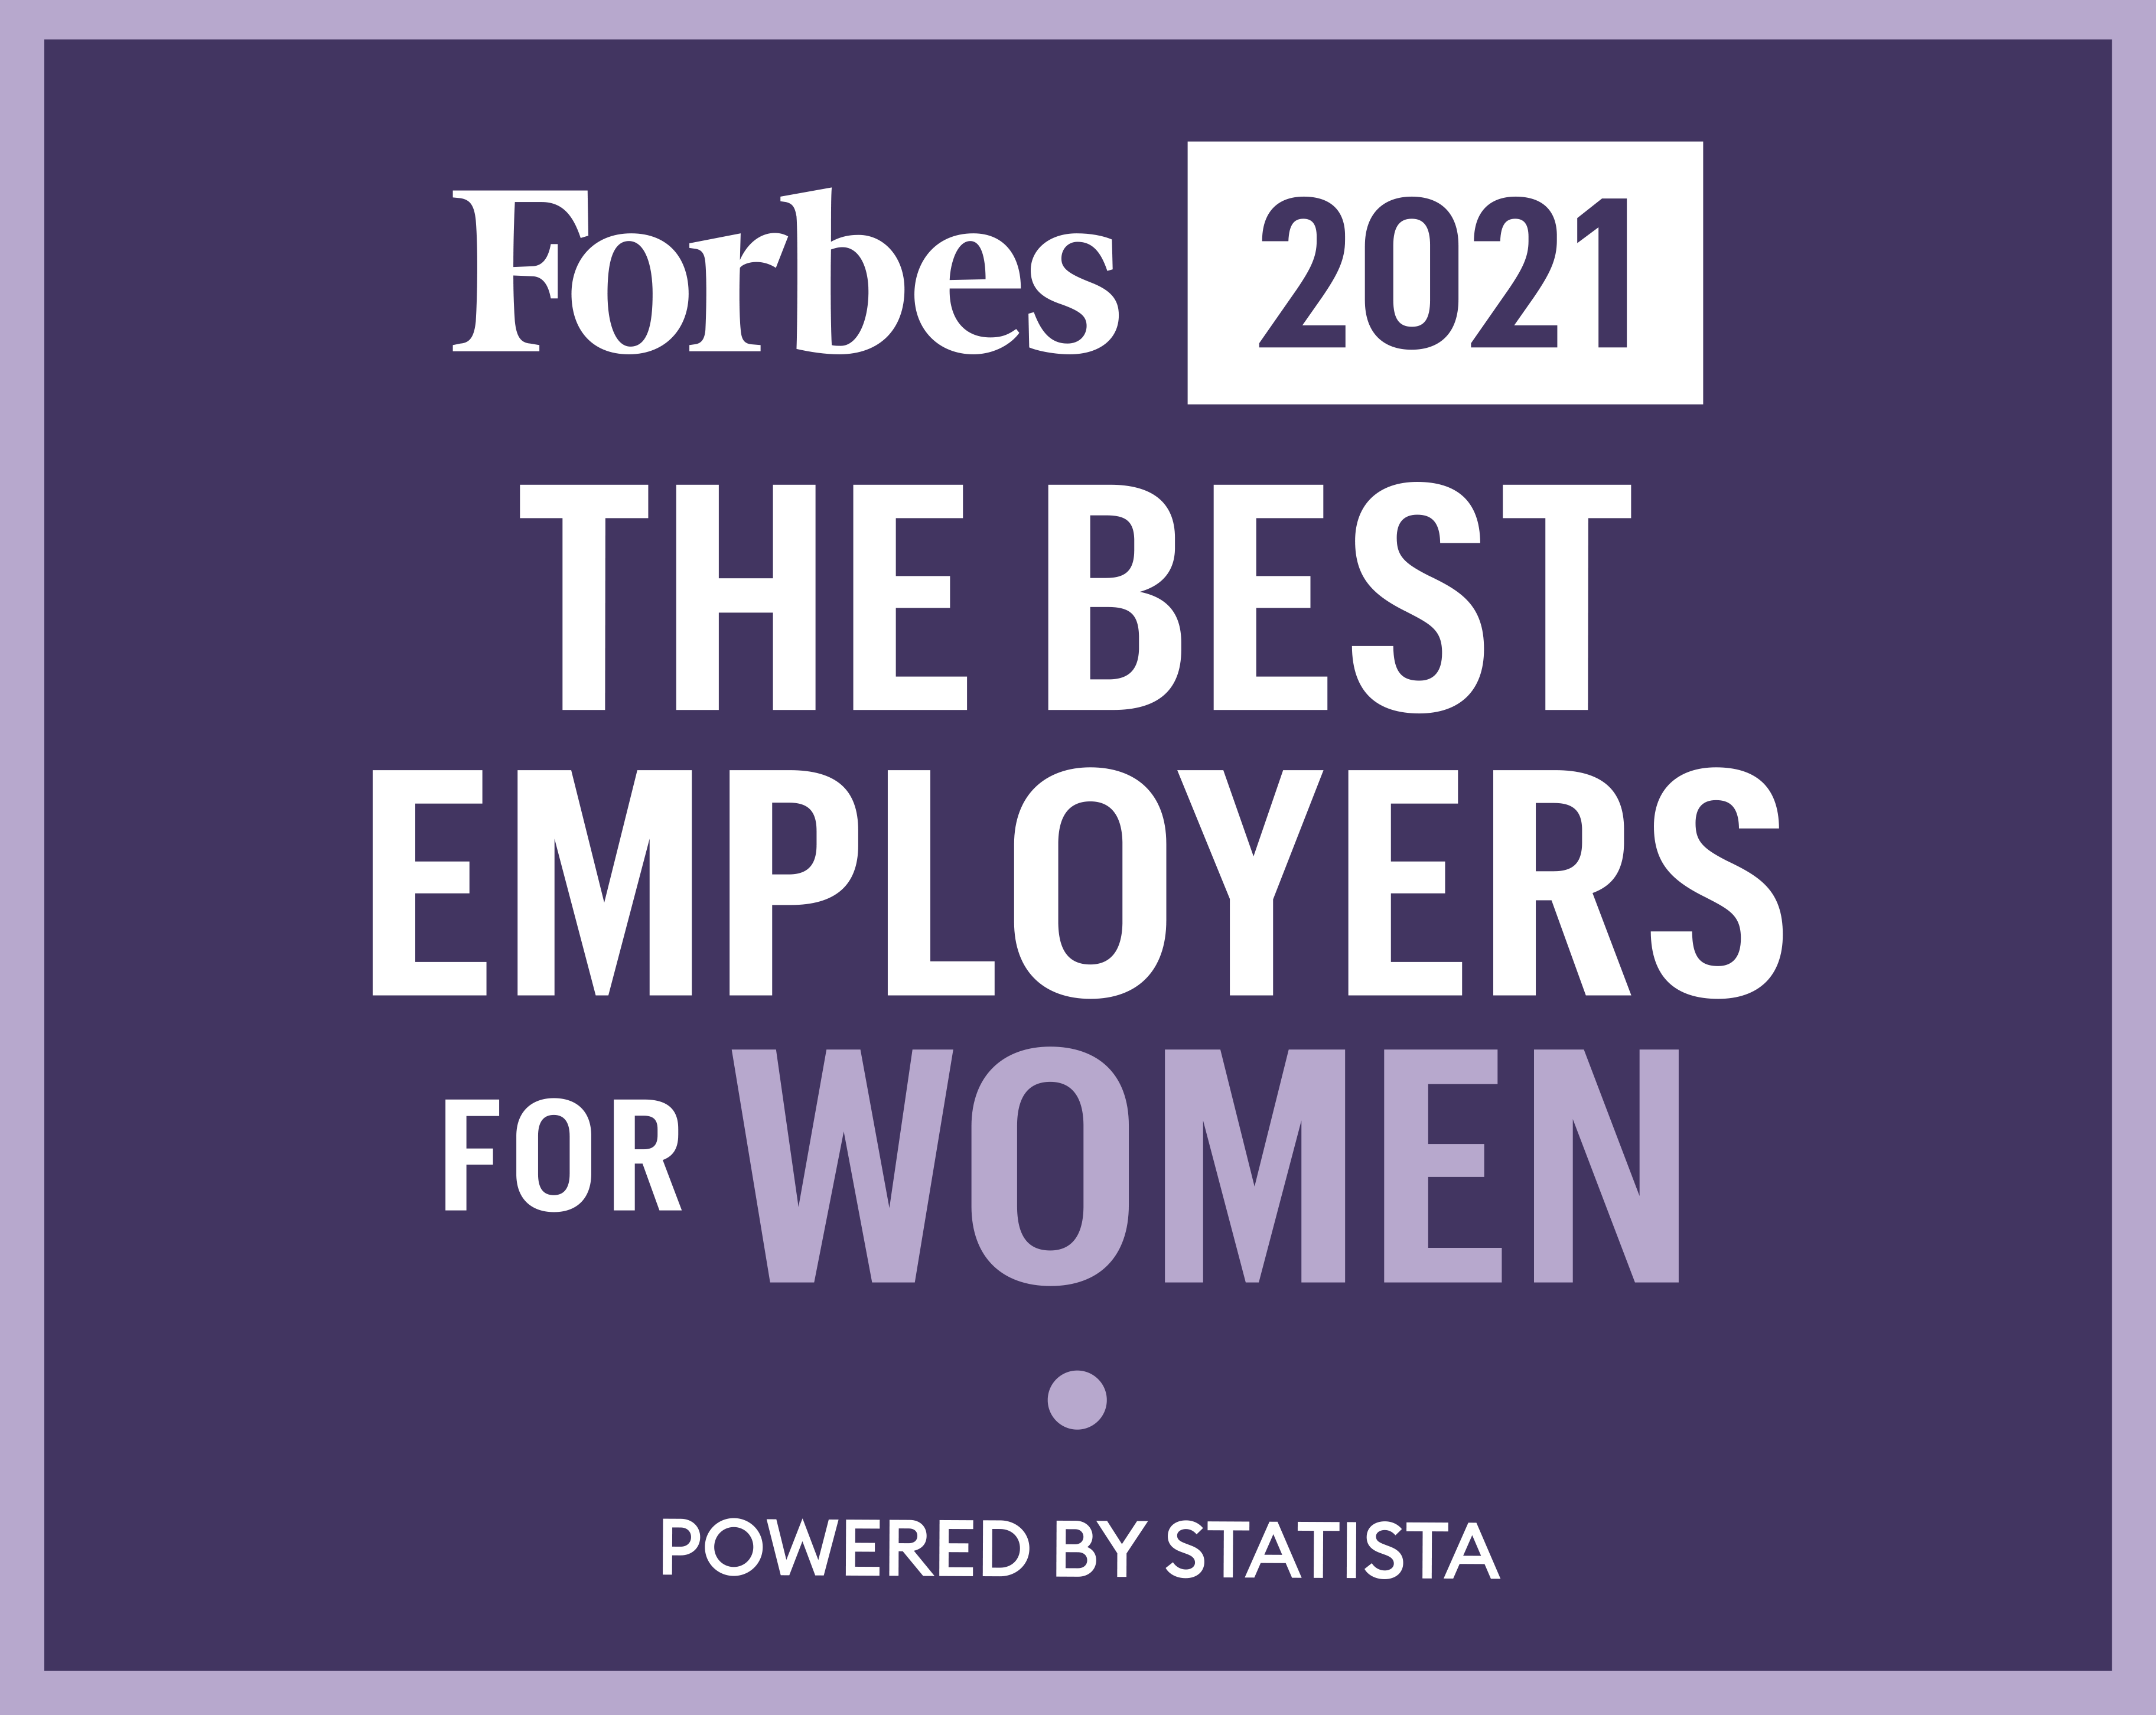 Forbes 2021 The Best Employers for Women Powered by Statista